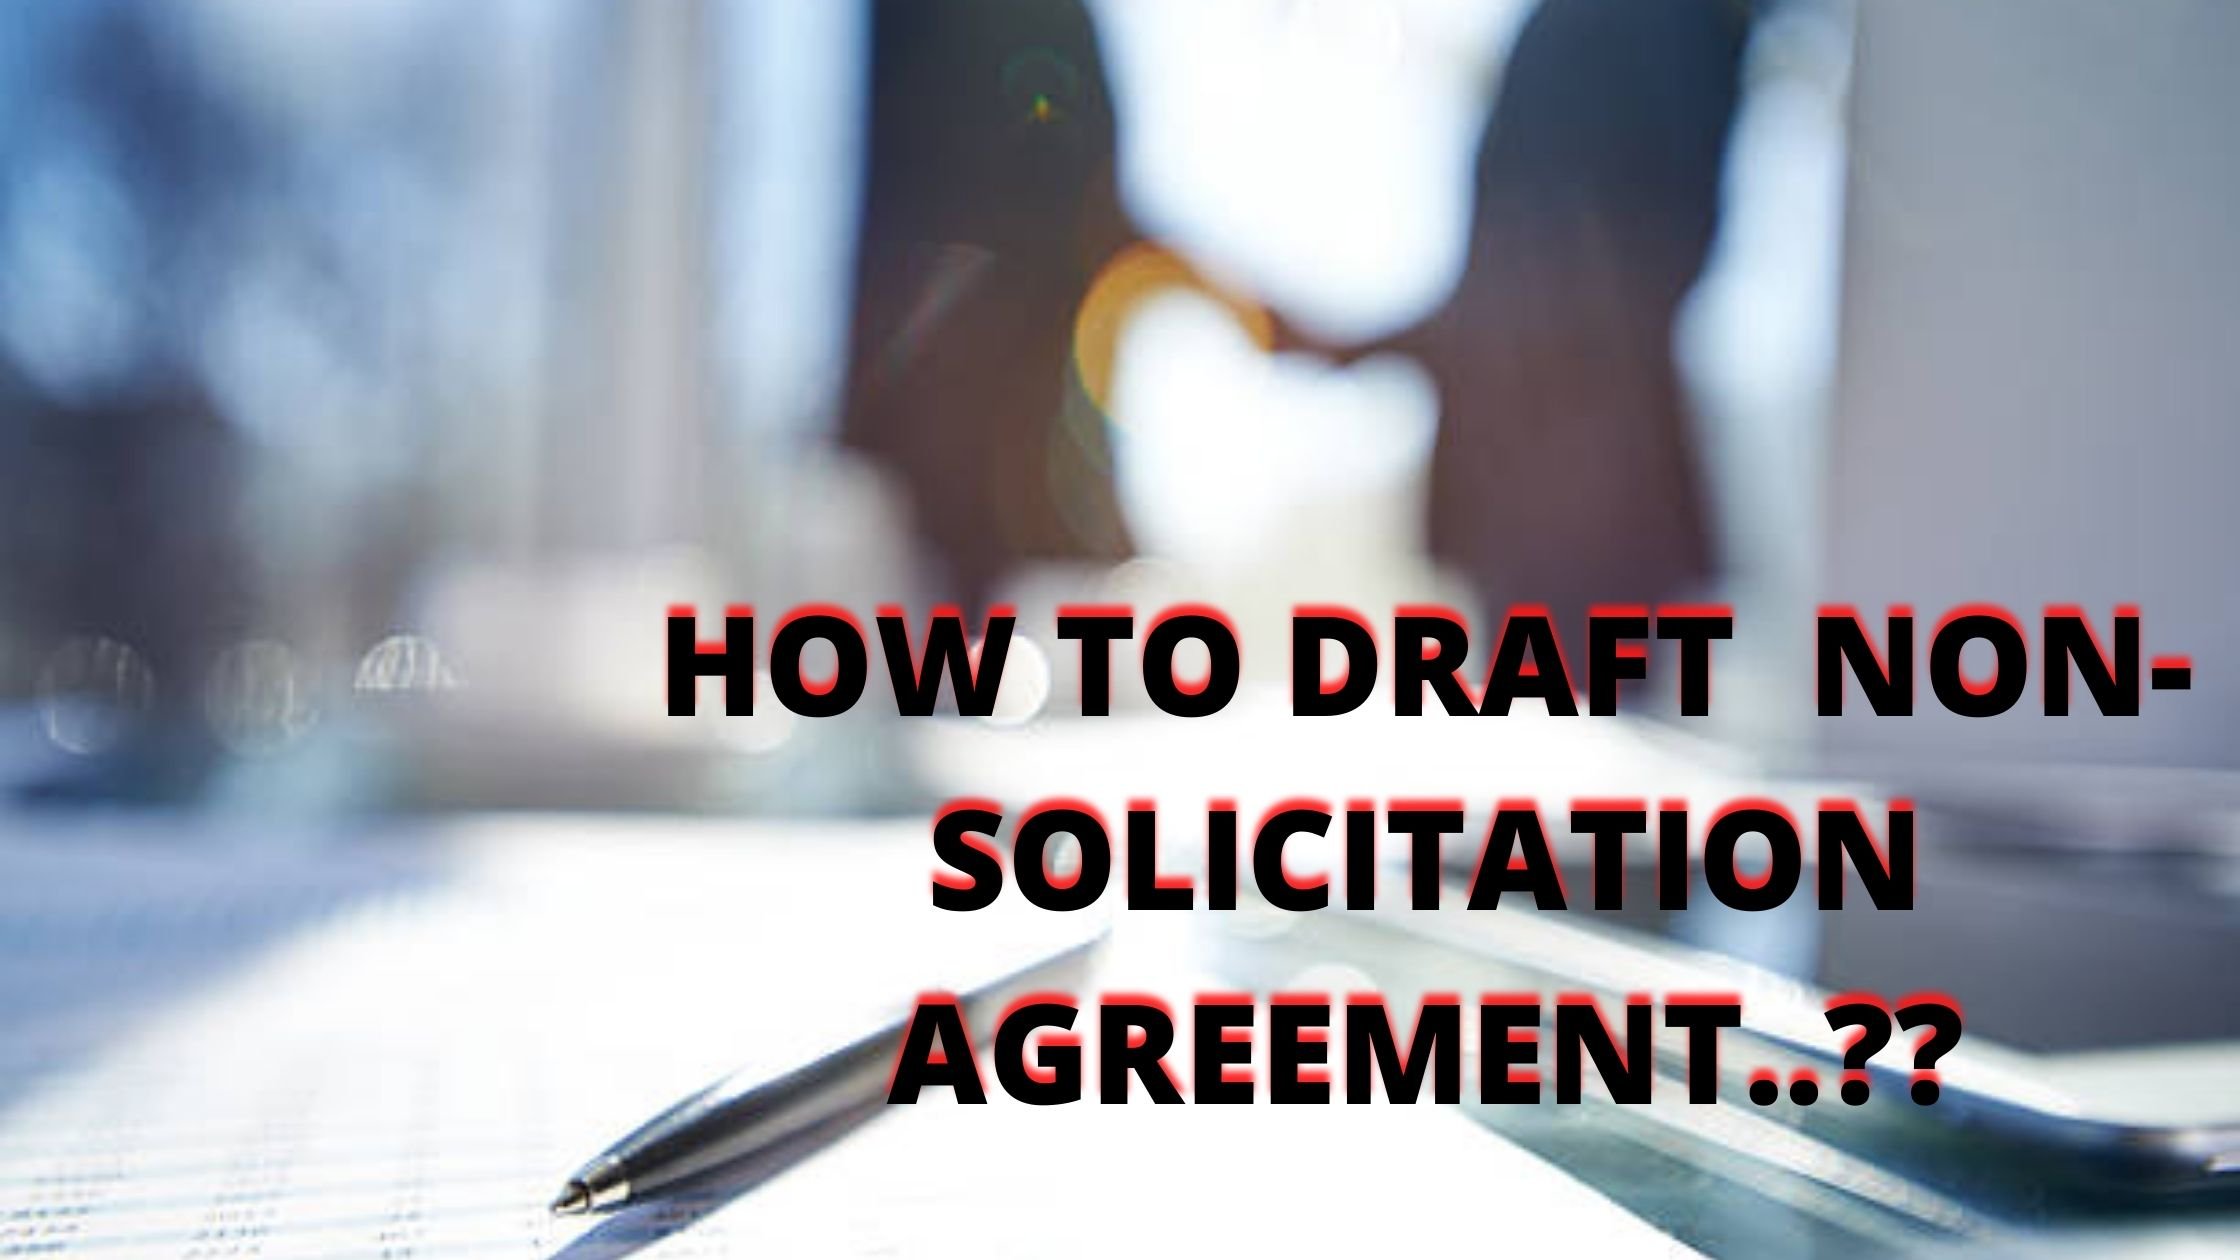 HOW TO DRAFT A NON-SOLICITATION AGREEMENT